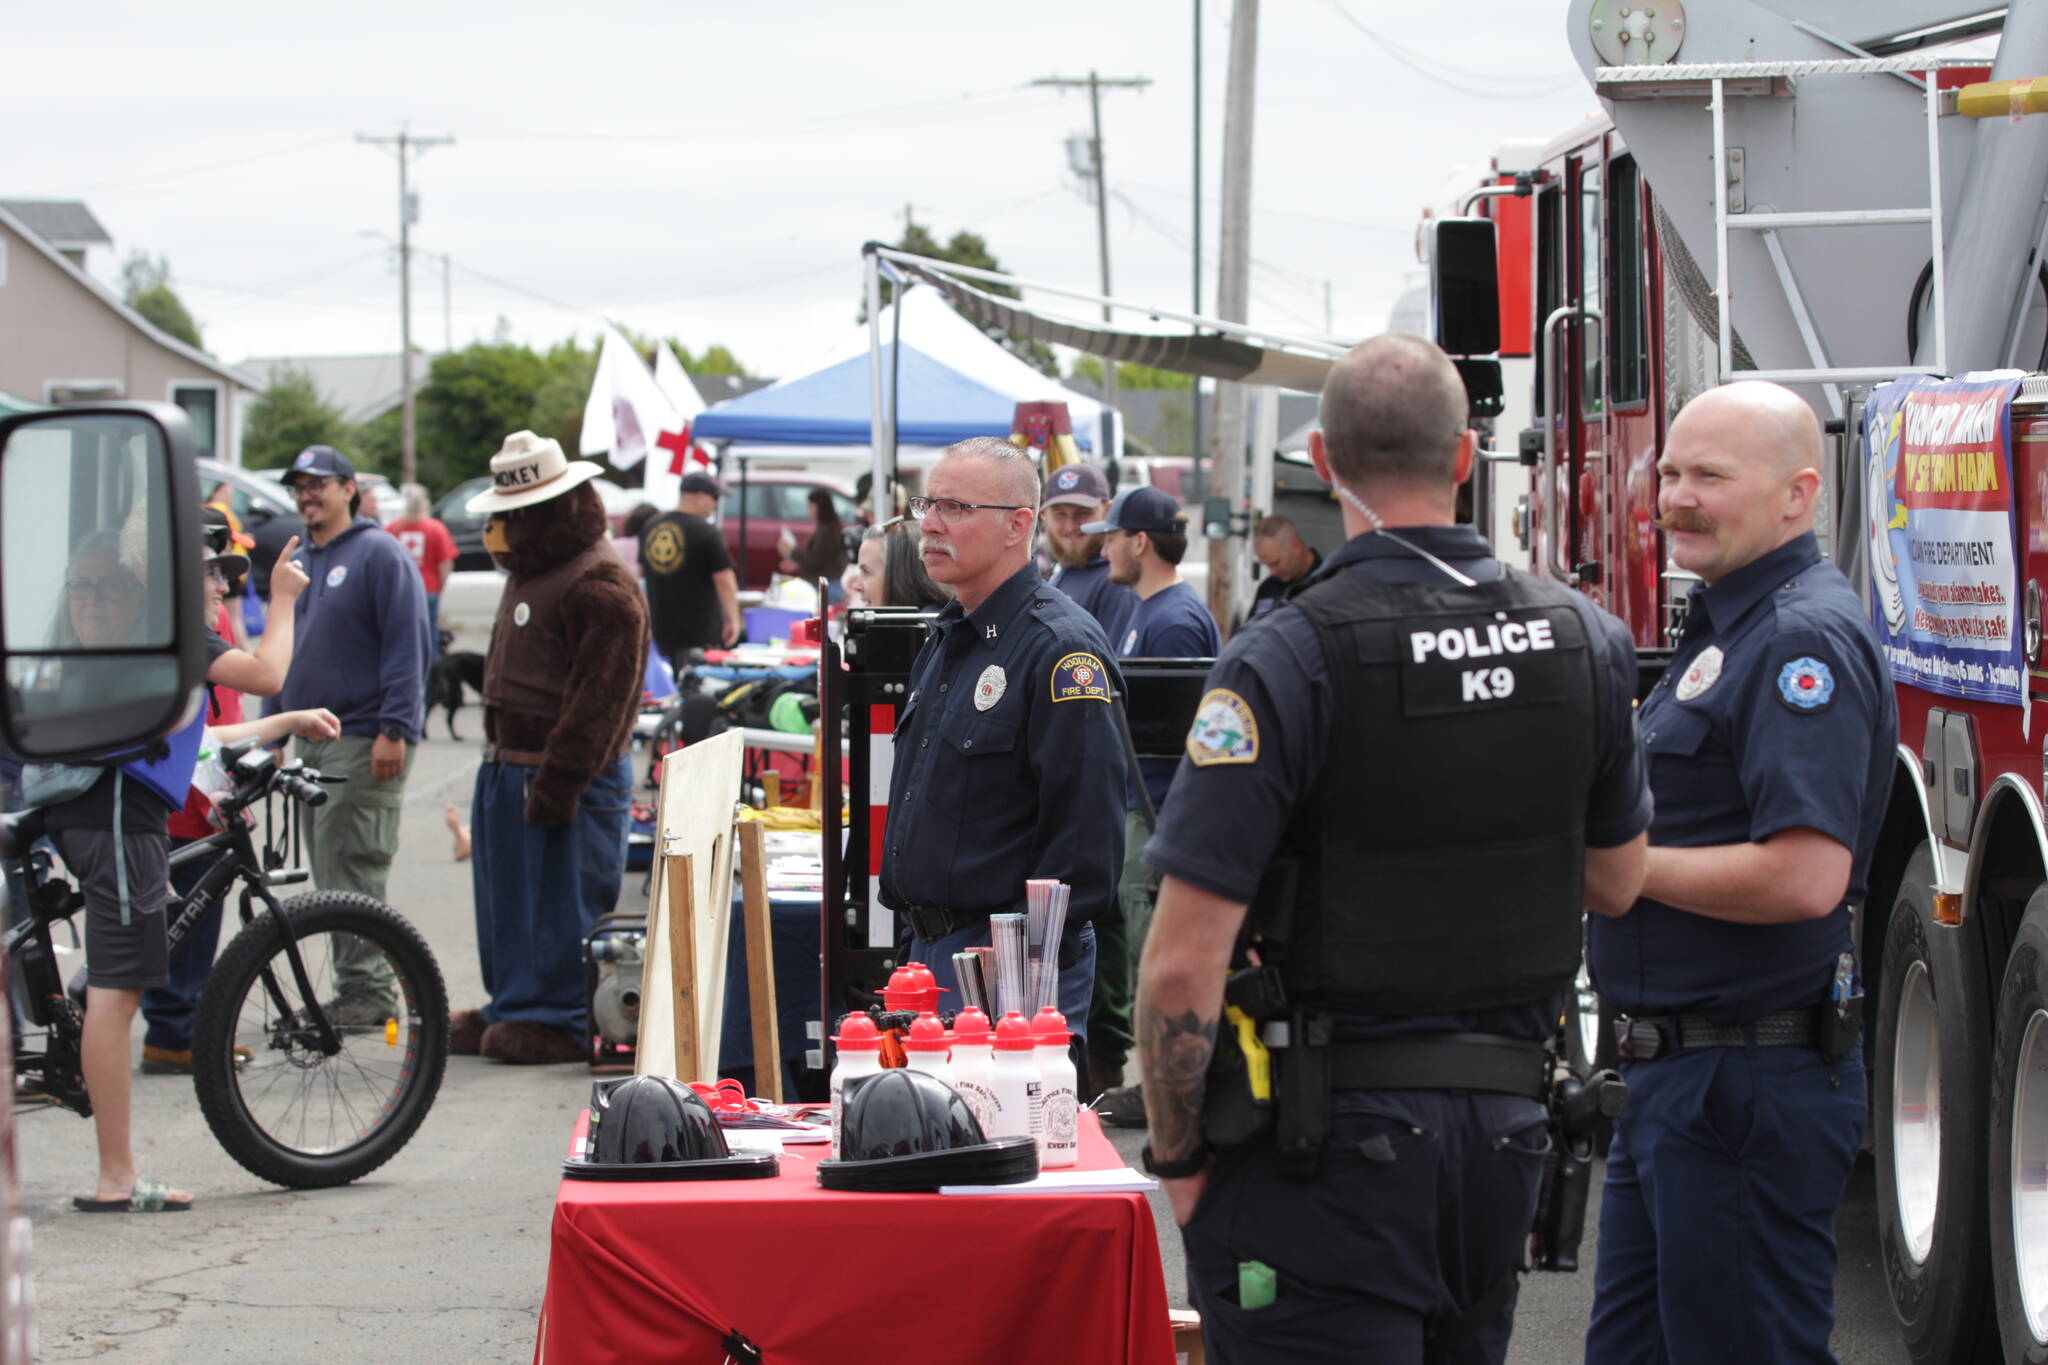 Michael S. Lockett / The Daily World
Public safety organizations, disaster relief groups and more took part in the county’s Emergency Preparedness Expo on July 22.